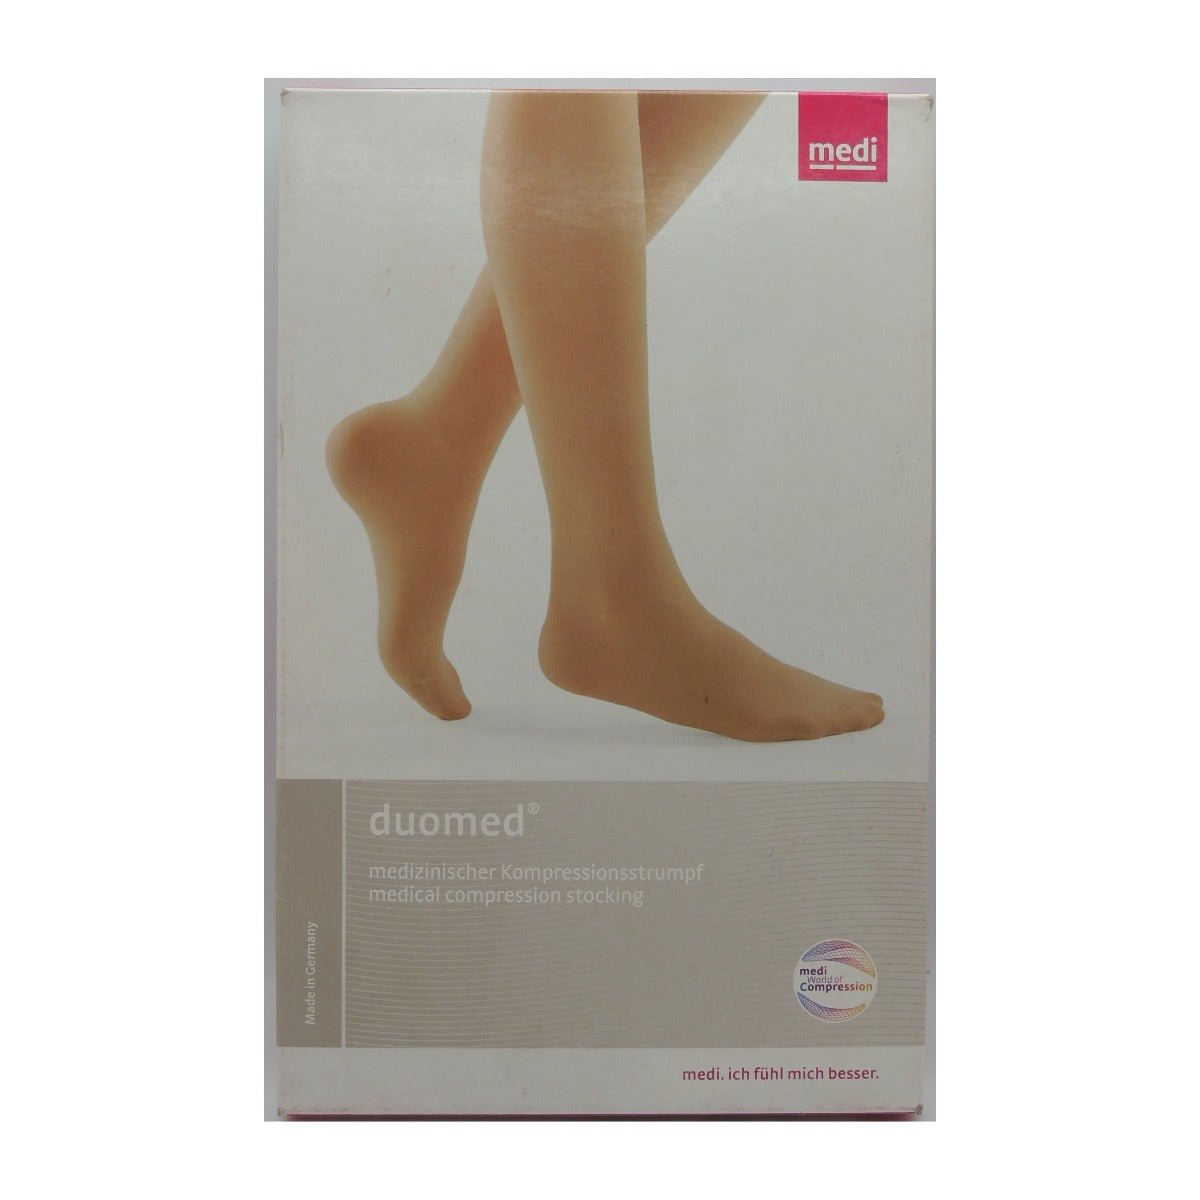 Medi Duomed Compression Stockings - Bloom Pharmacy